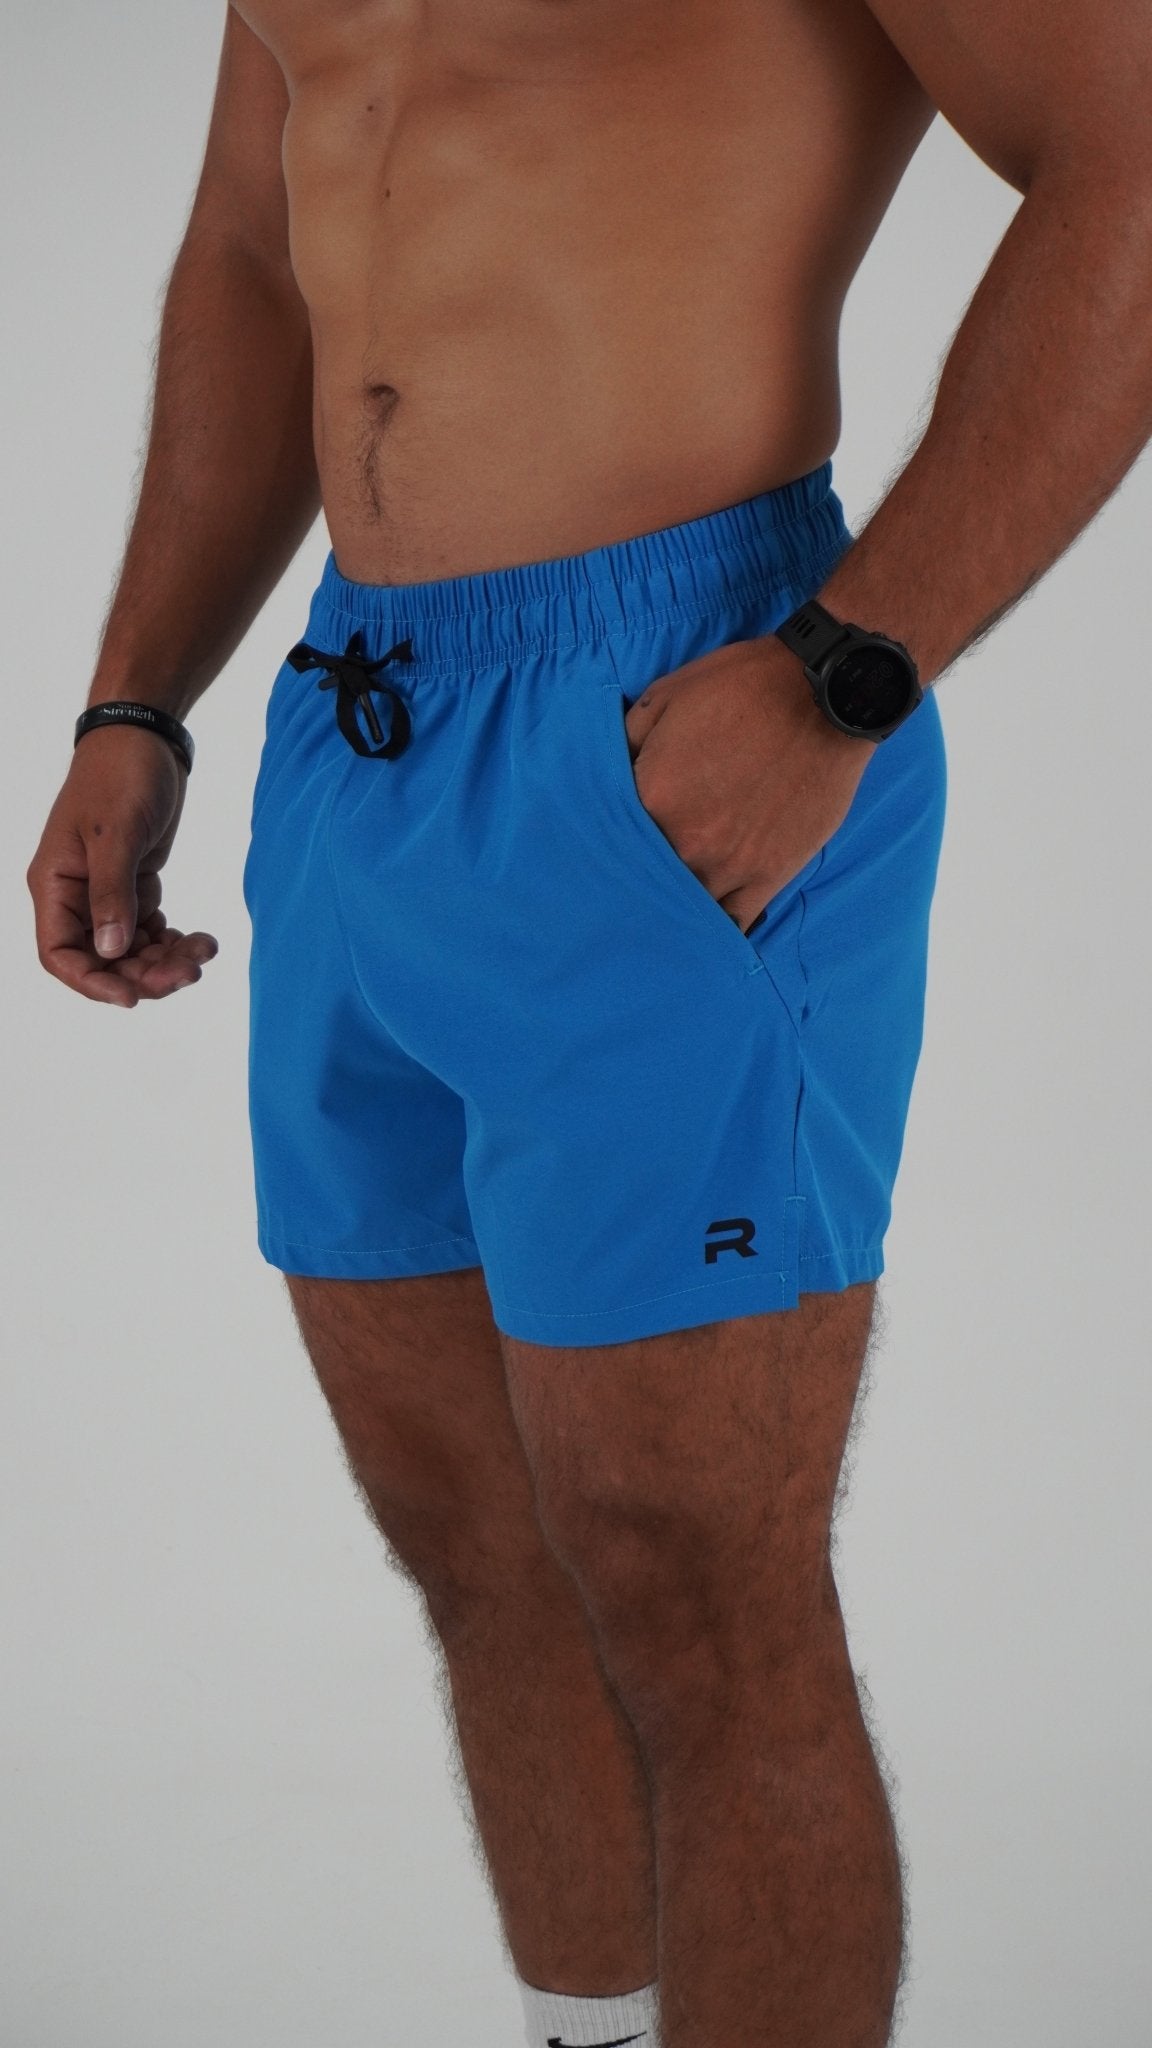 Mid Thigh Shorts 2.0 - Resilient Active